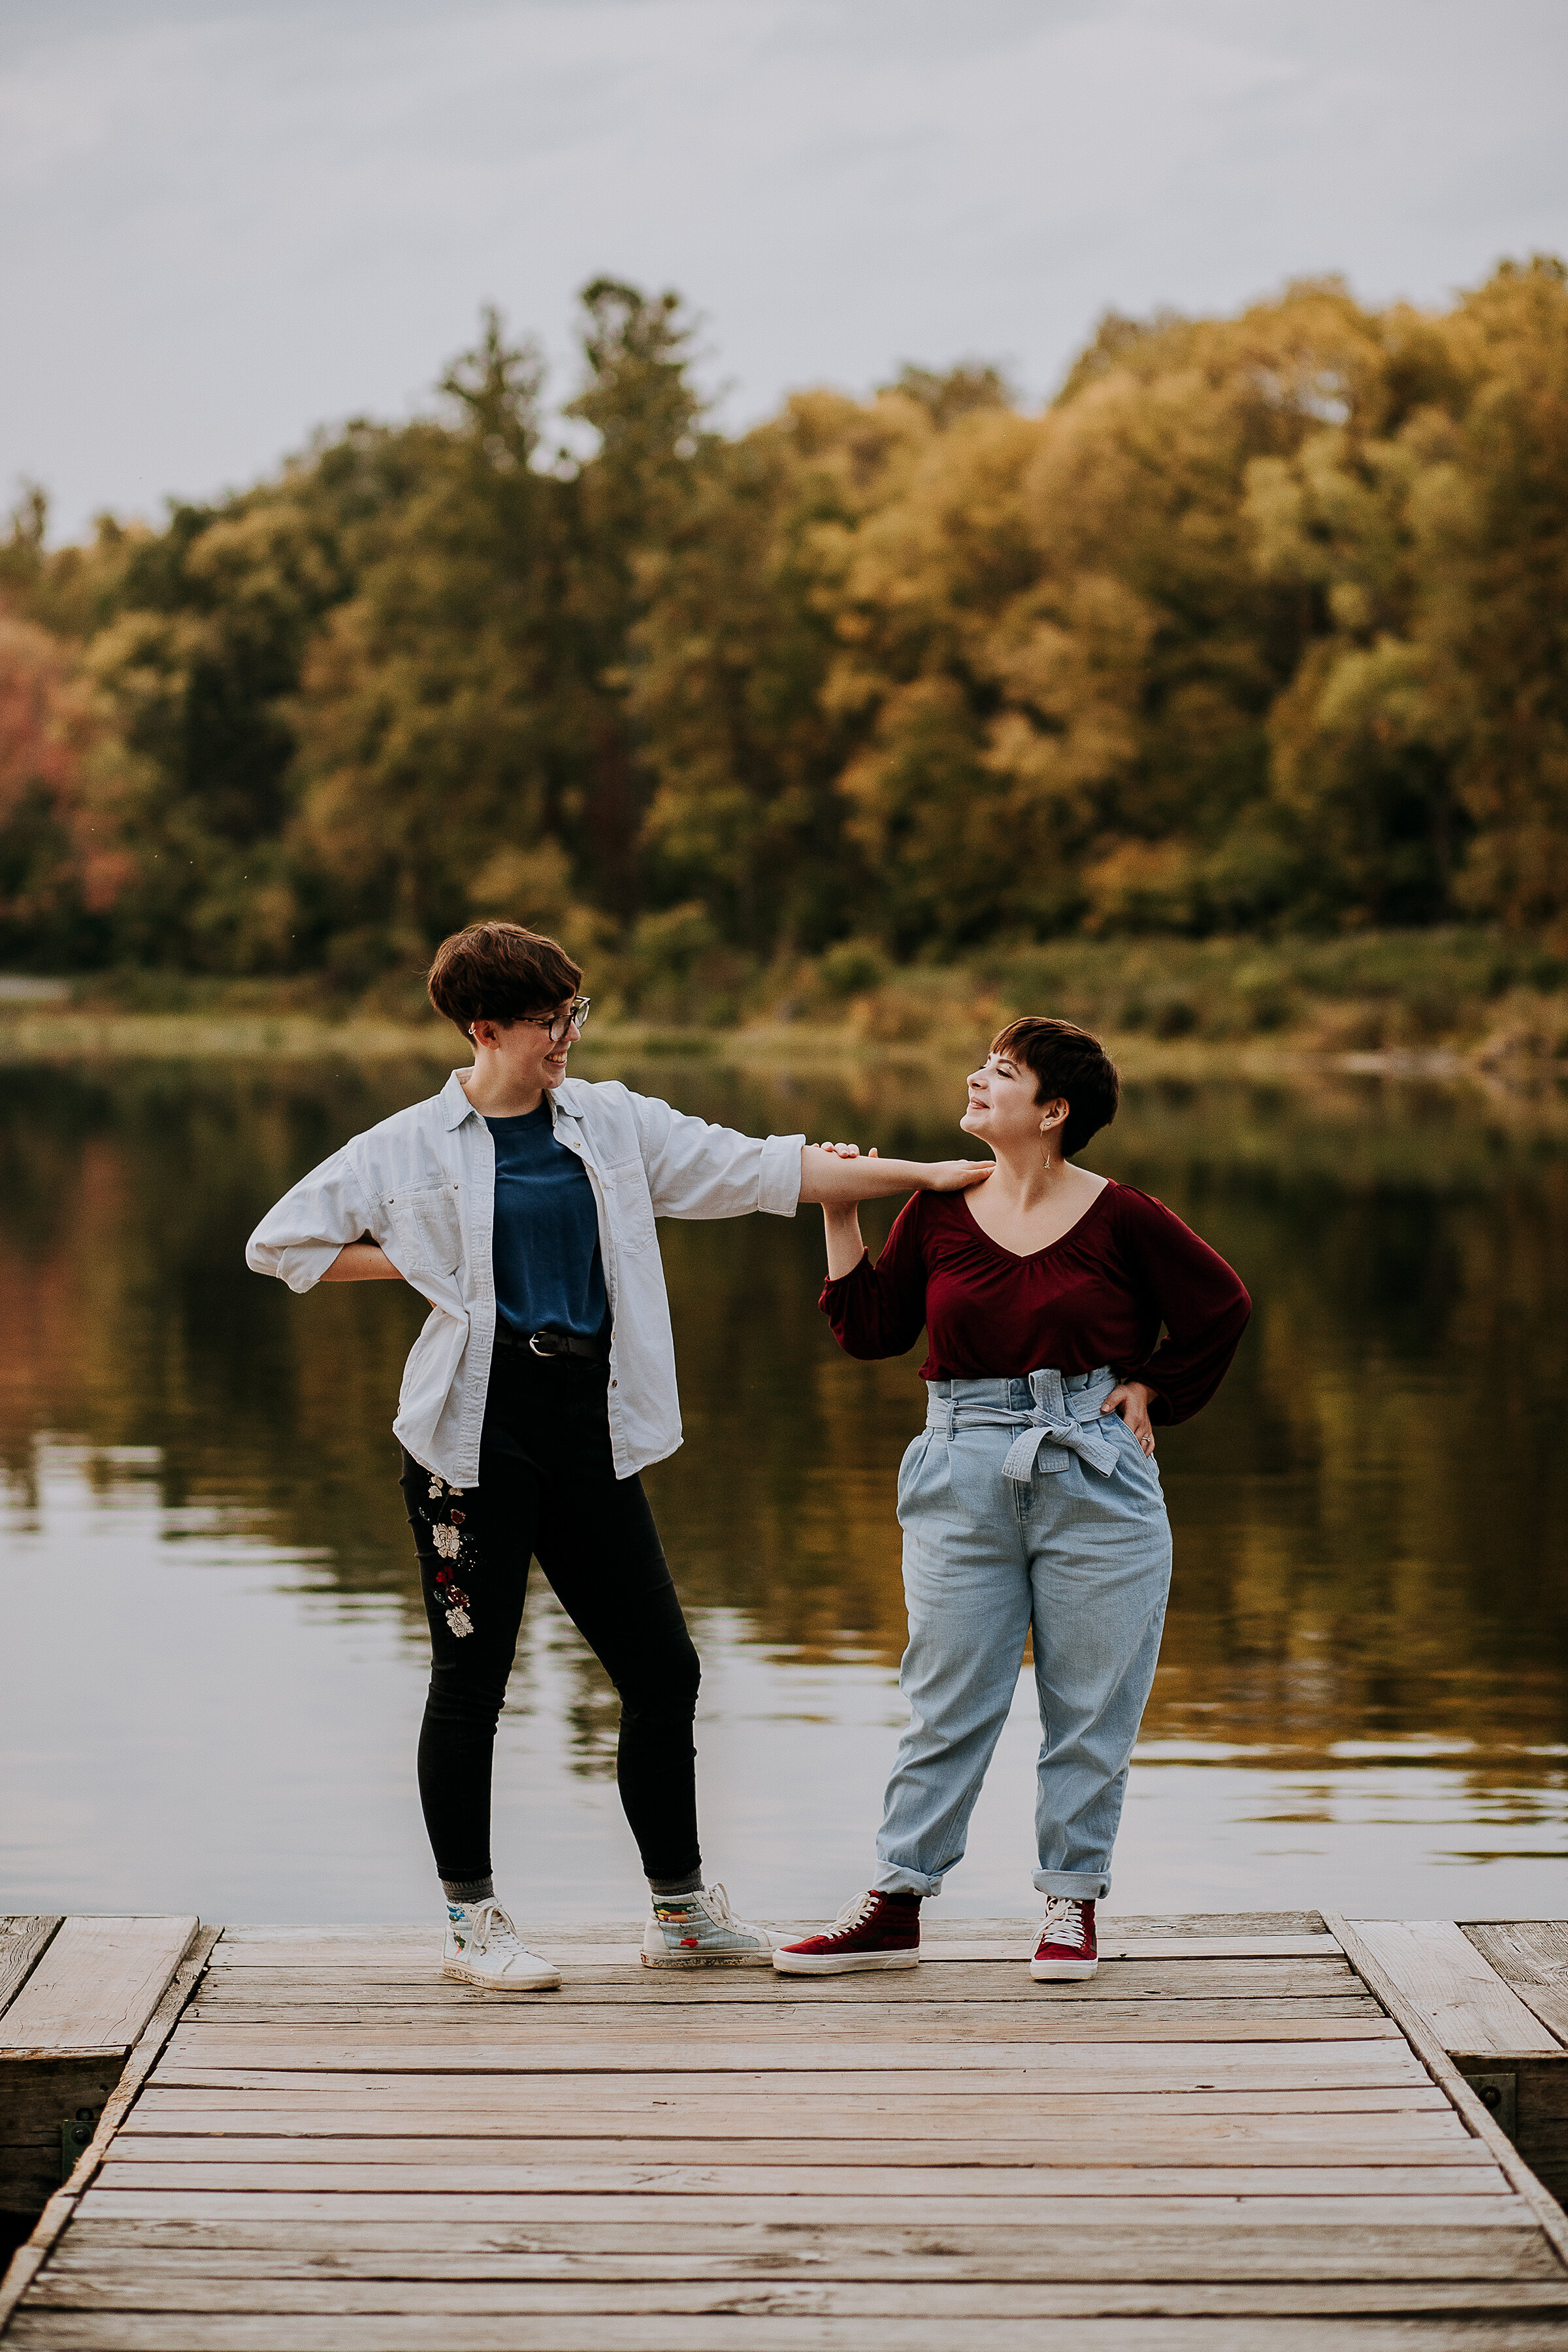  Candid photo of same-sex couple on a dock by a lake in the fall wearing maroon and gray in Indiana by Kindred + Co. lake and dock location for photoshoot in indiana fort wayne indiana same-sex couple pose inspo for engagements casual fall outfits wi